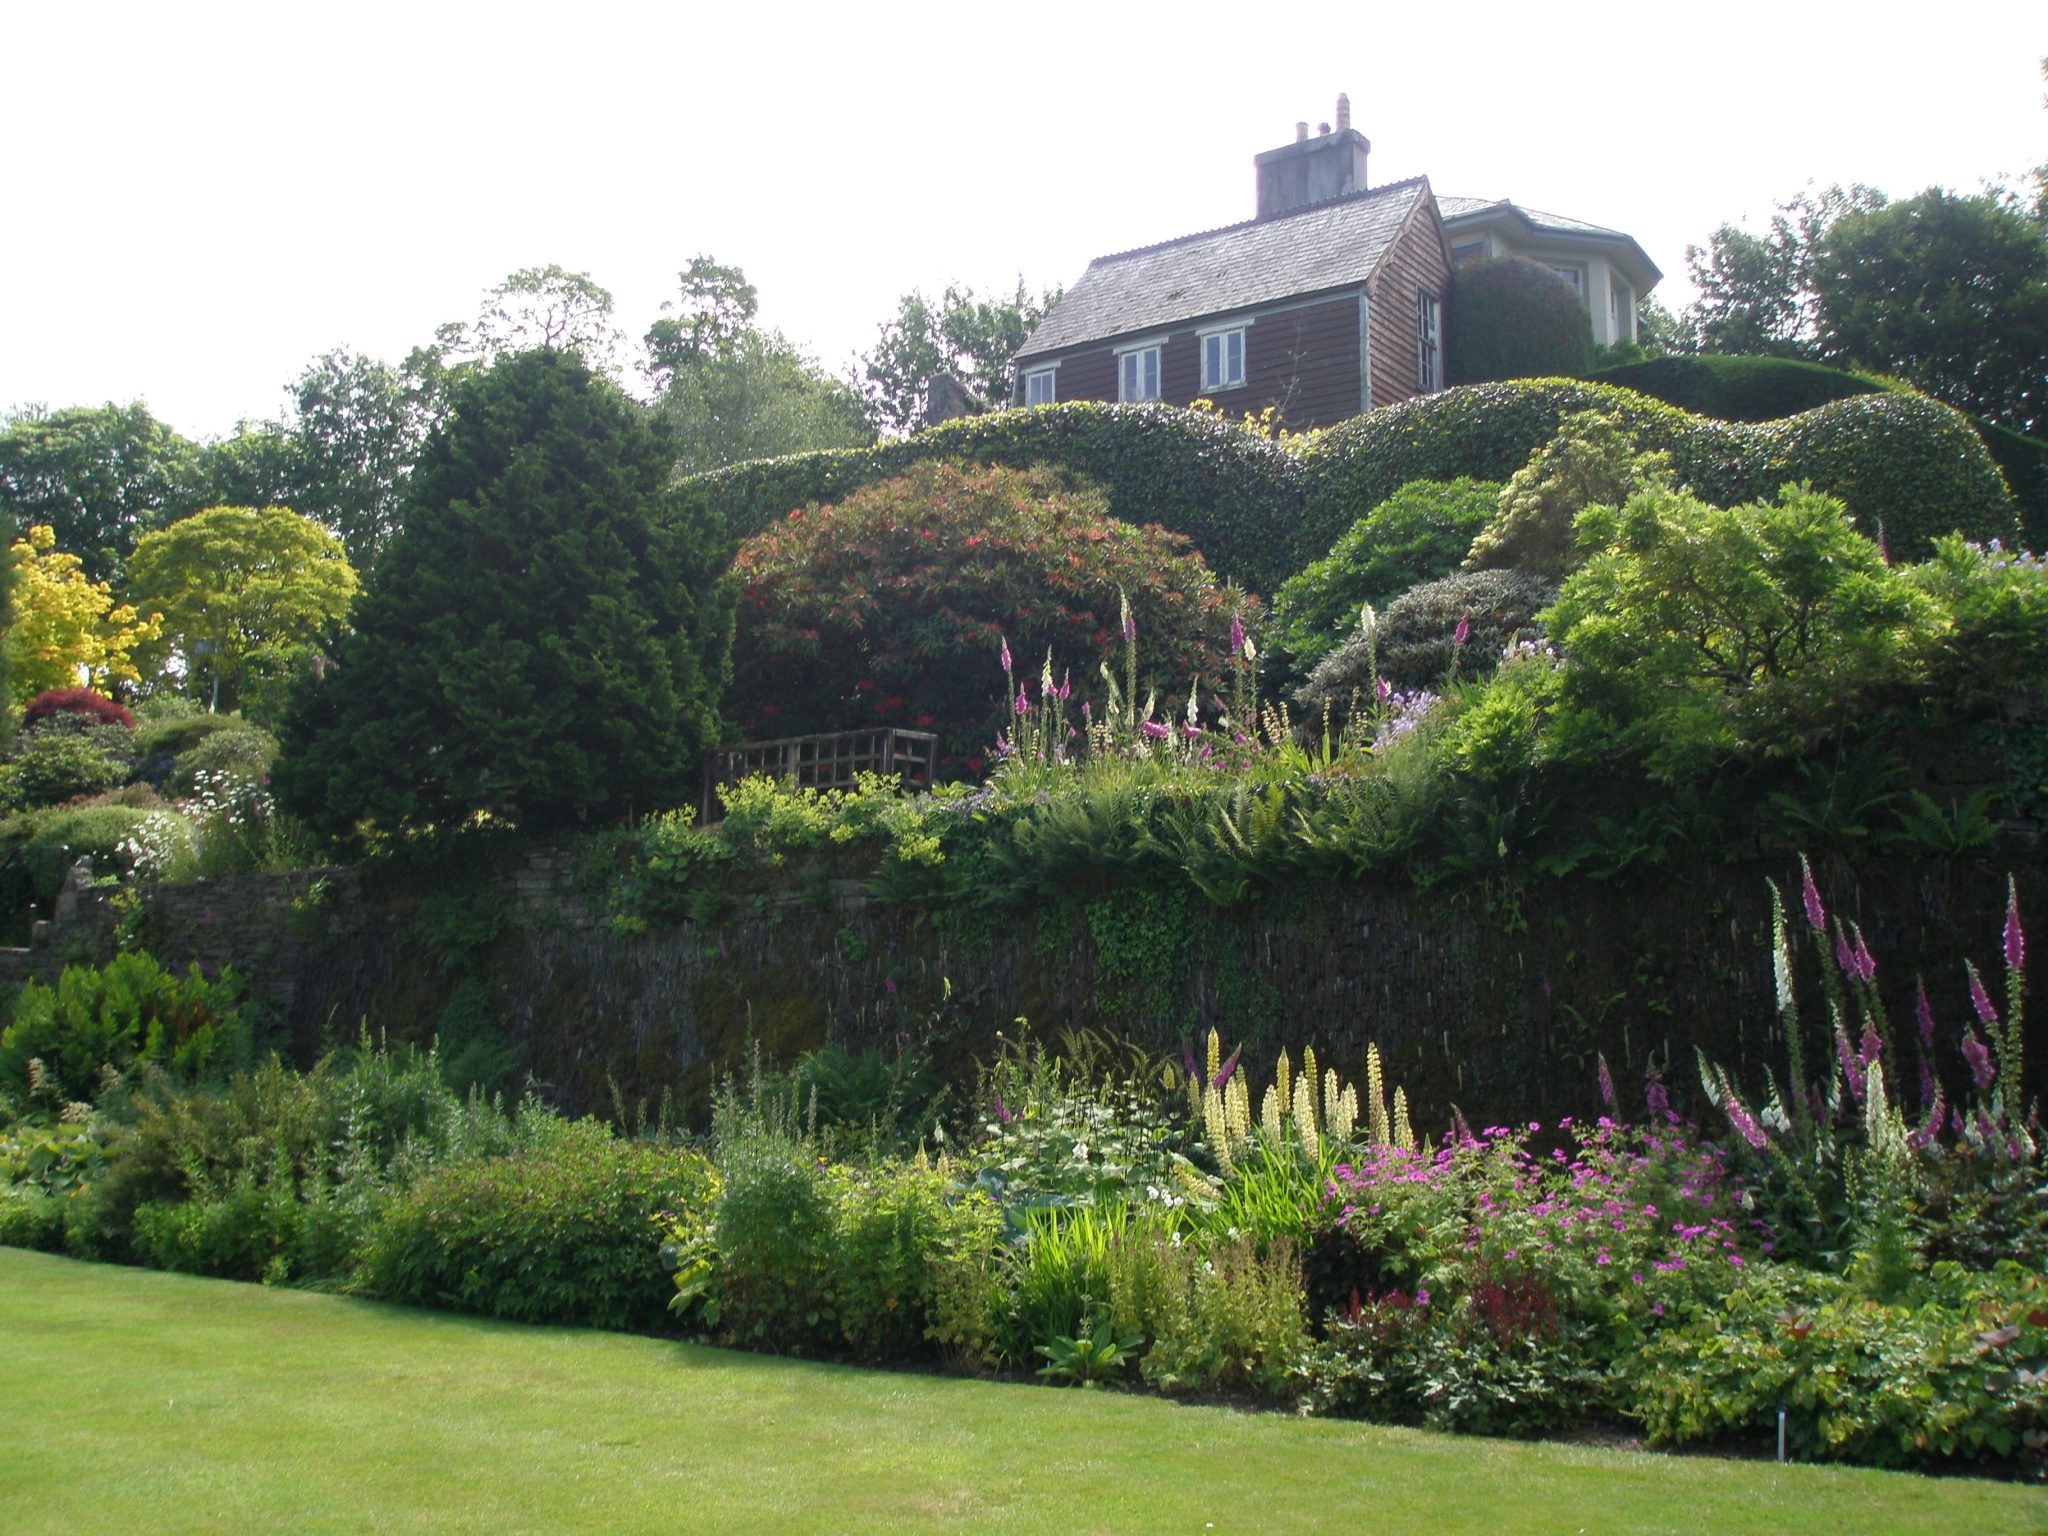 The Walled Garden's Tennis Court Lawn, with a view uphill, to the Main House. Foxgloves were in their full glory.